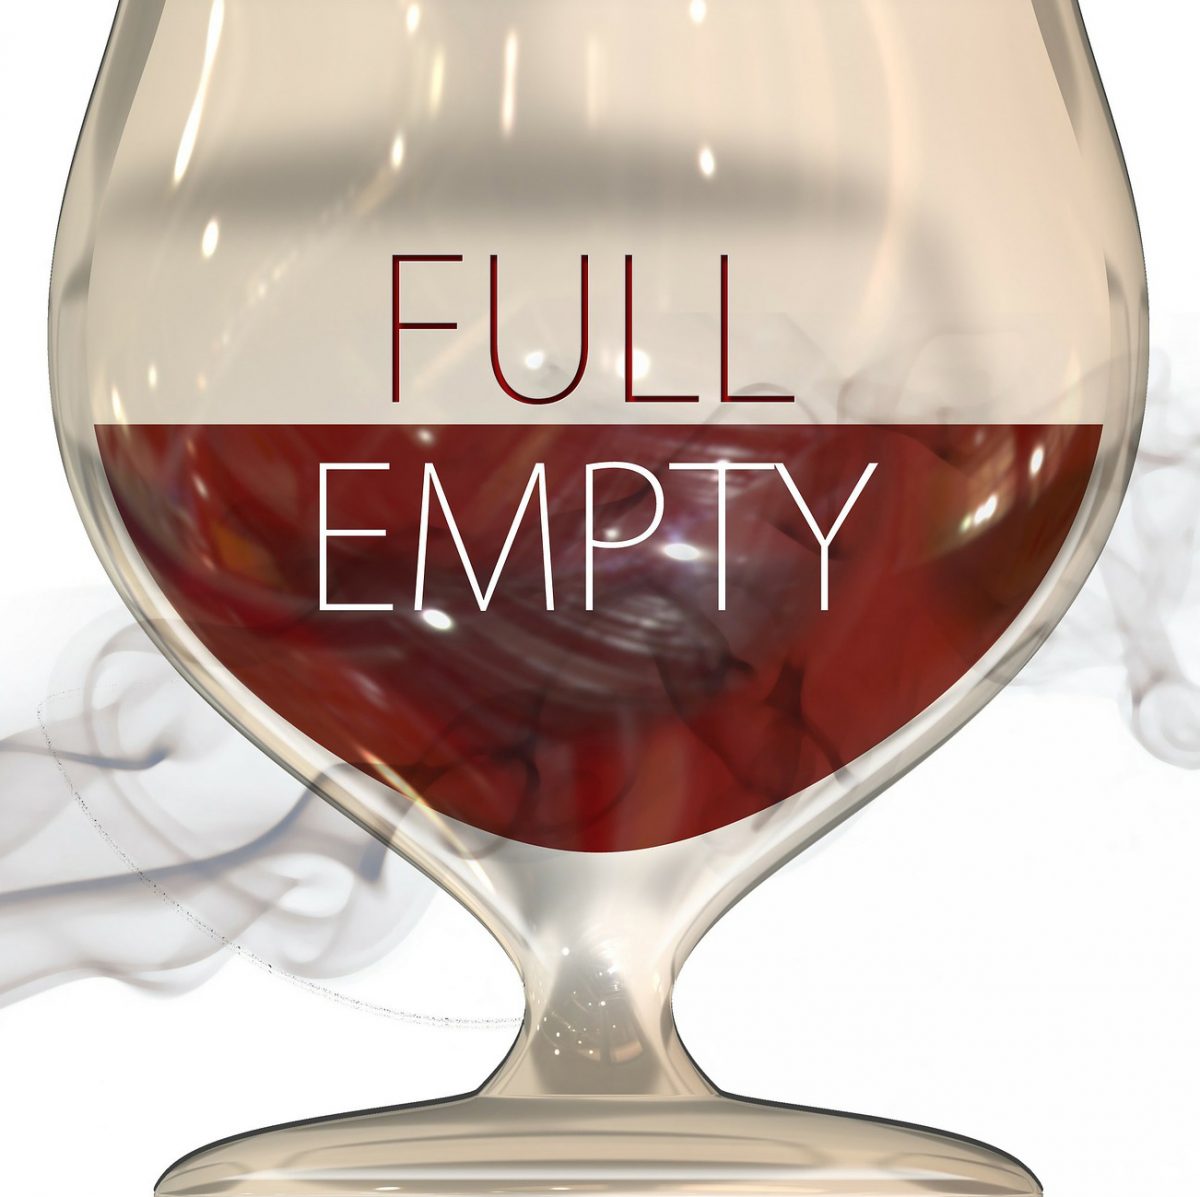 Is the glass half full or half empty? The choice is yours. (Image by Gerd Altmann from Pixabay)
